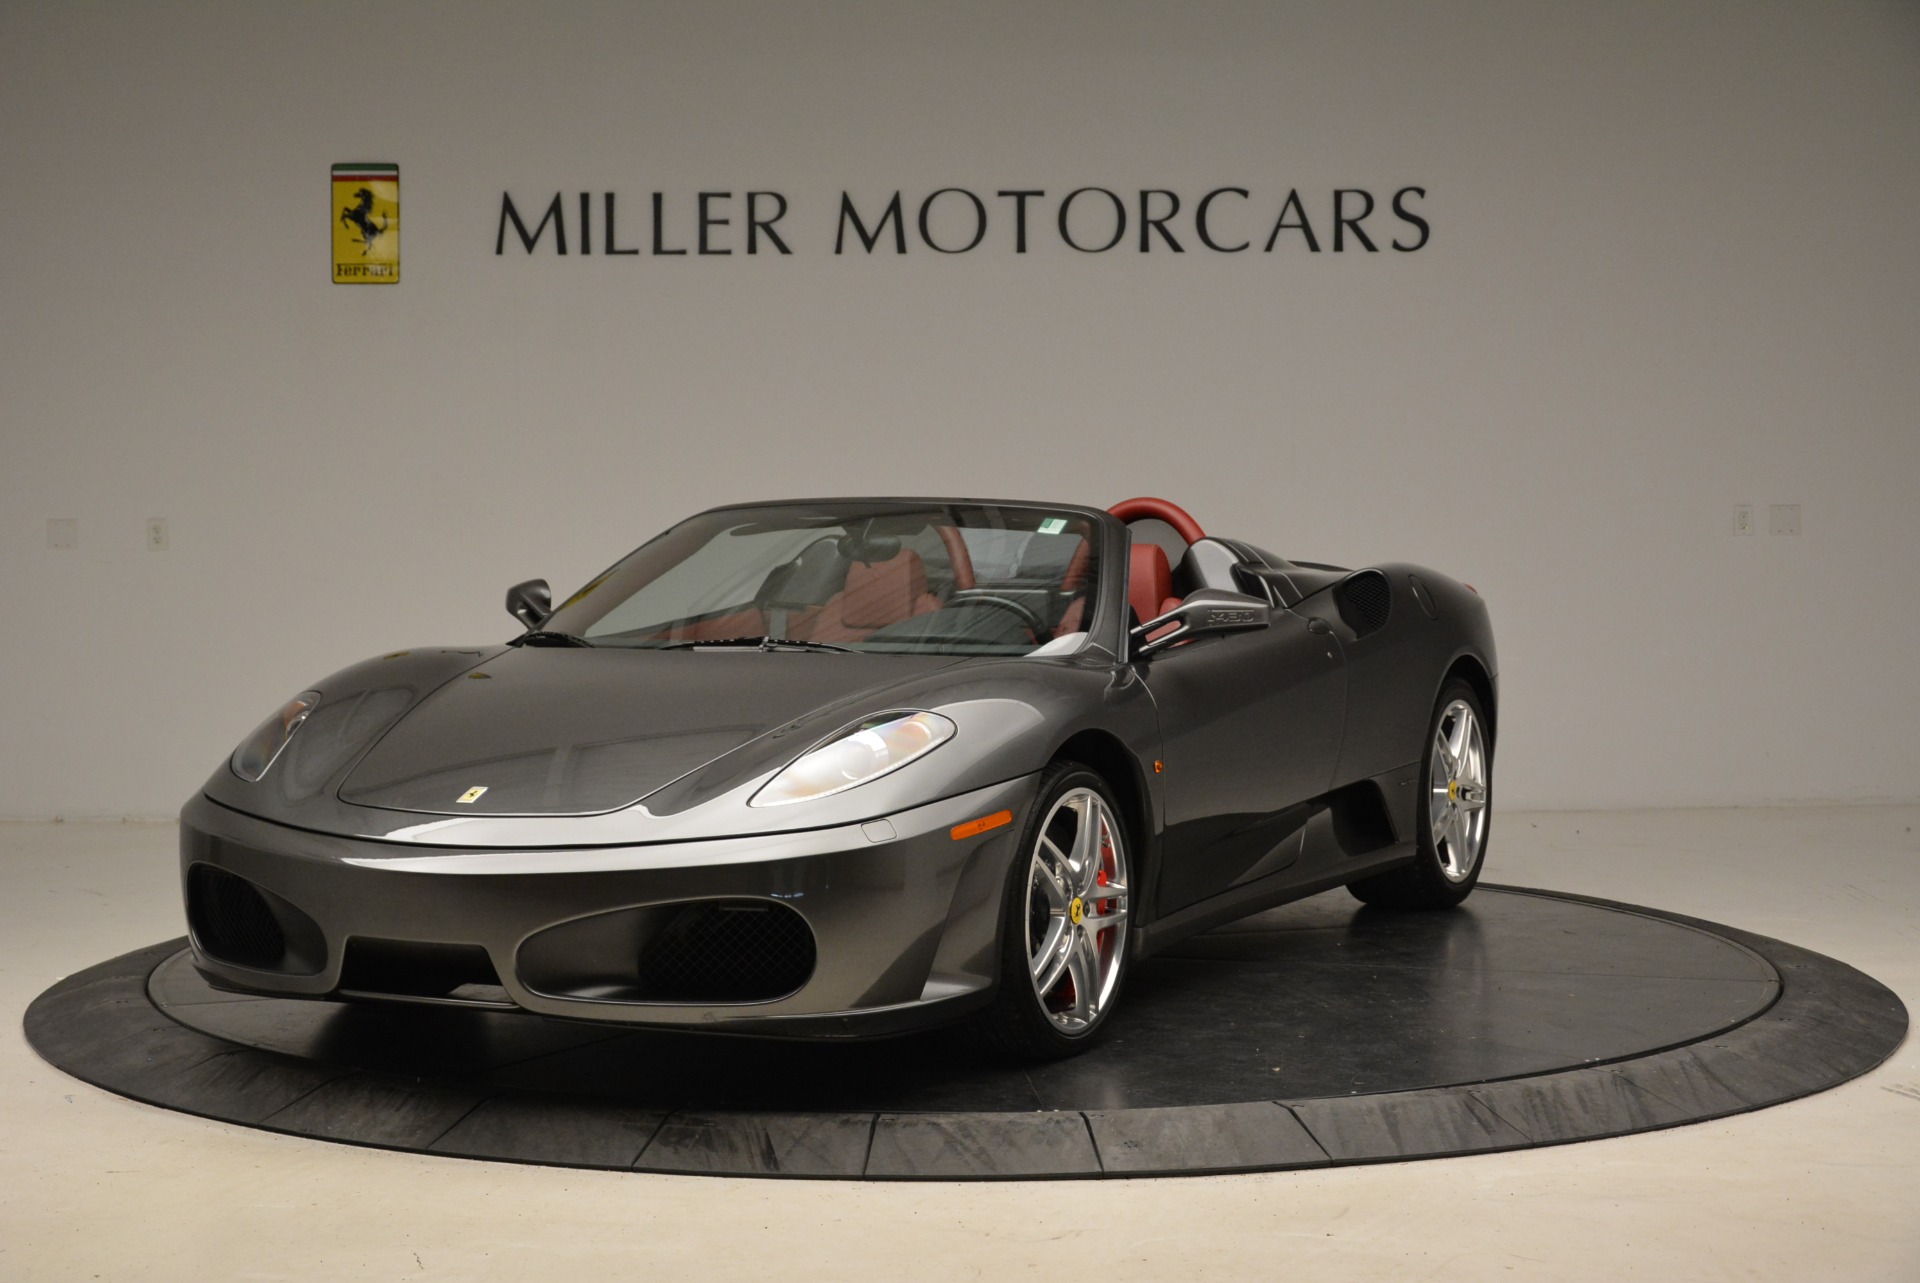 Used 2008 Ferrari F430 Spider for sale Sold at Pagani of Greenwich in Greenwich CT 06830 1